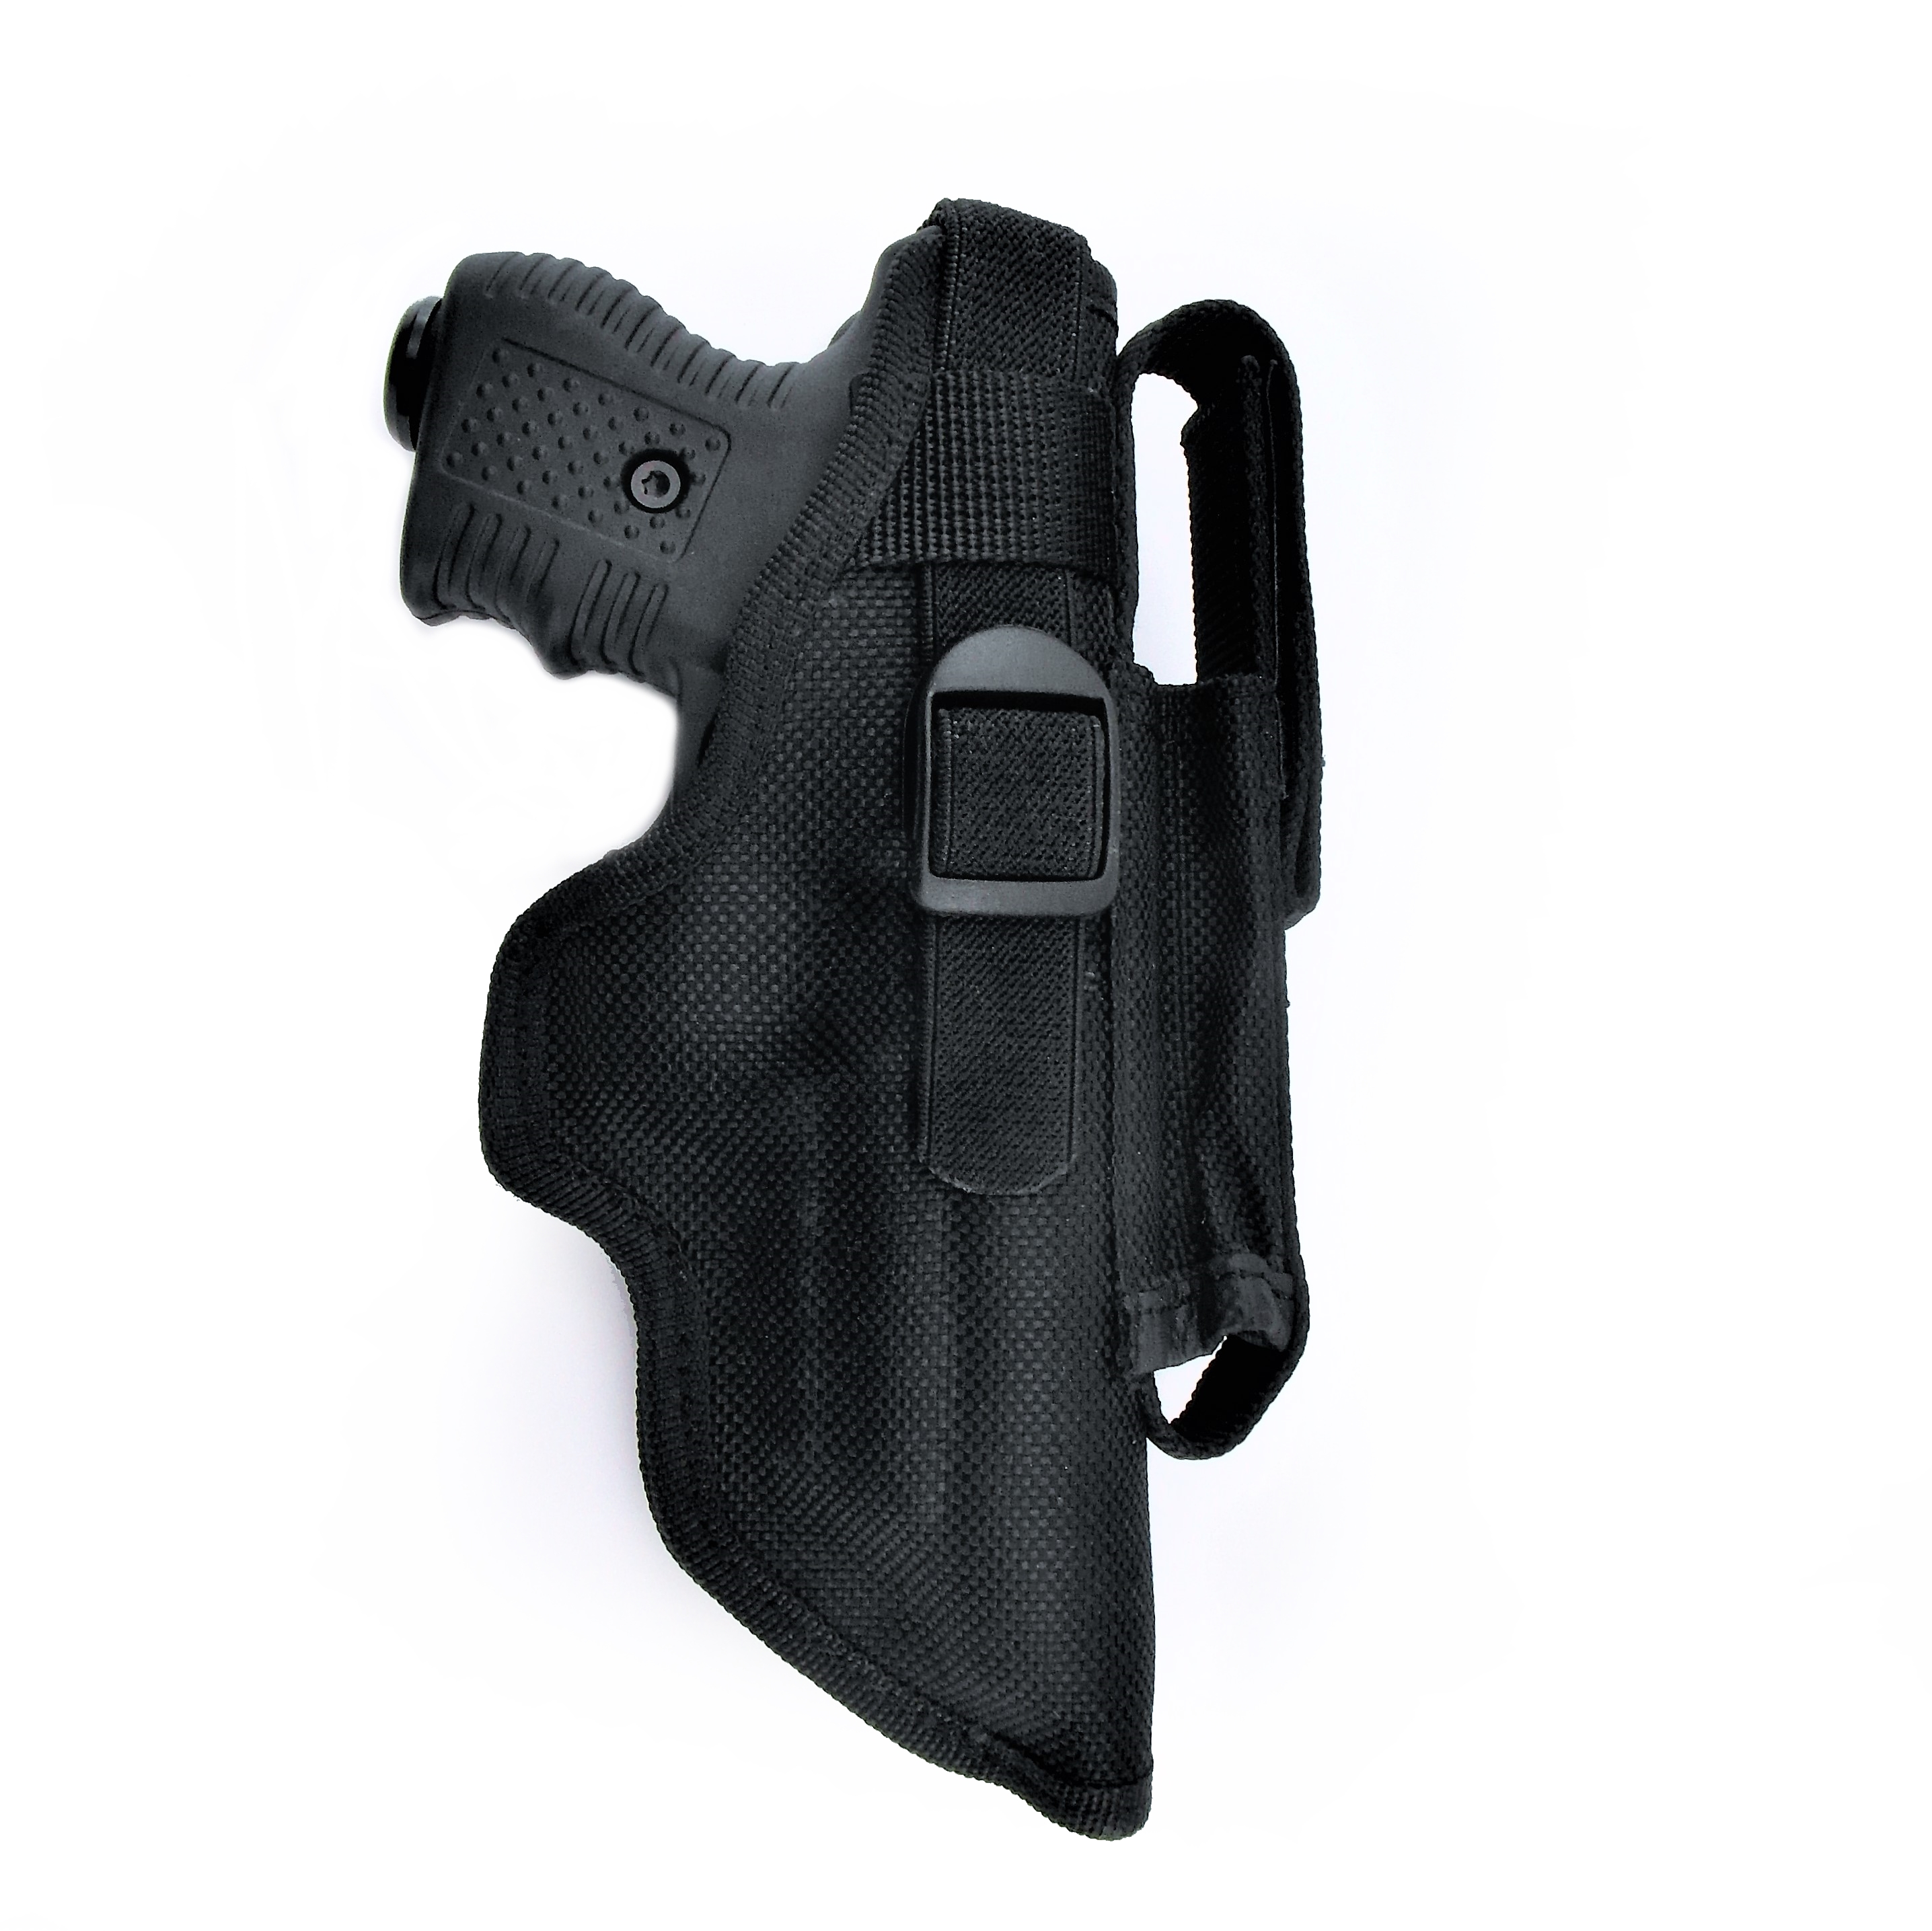 Jpx jet protector holster - Der absolute Favorit unseres Teams